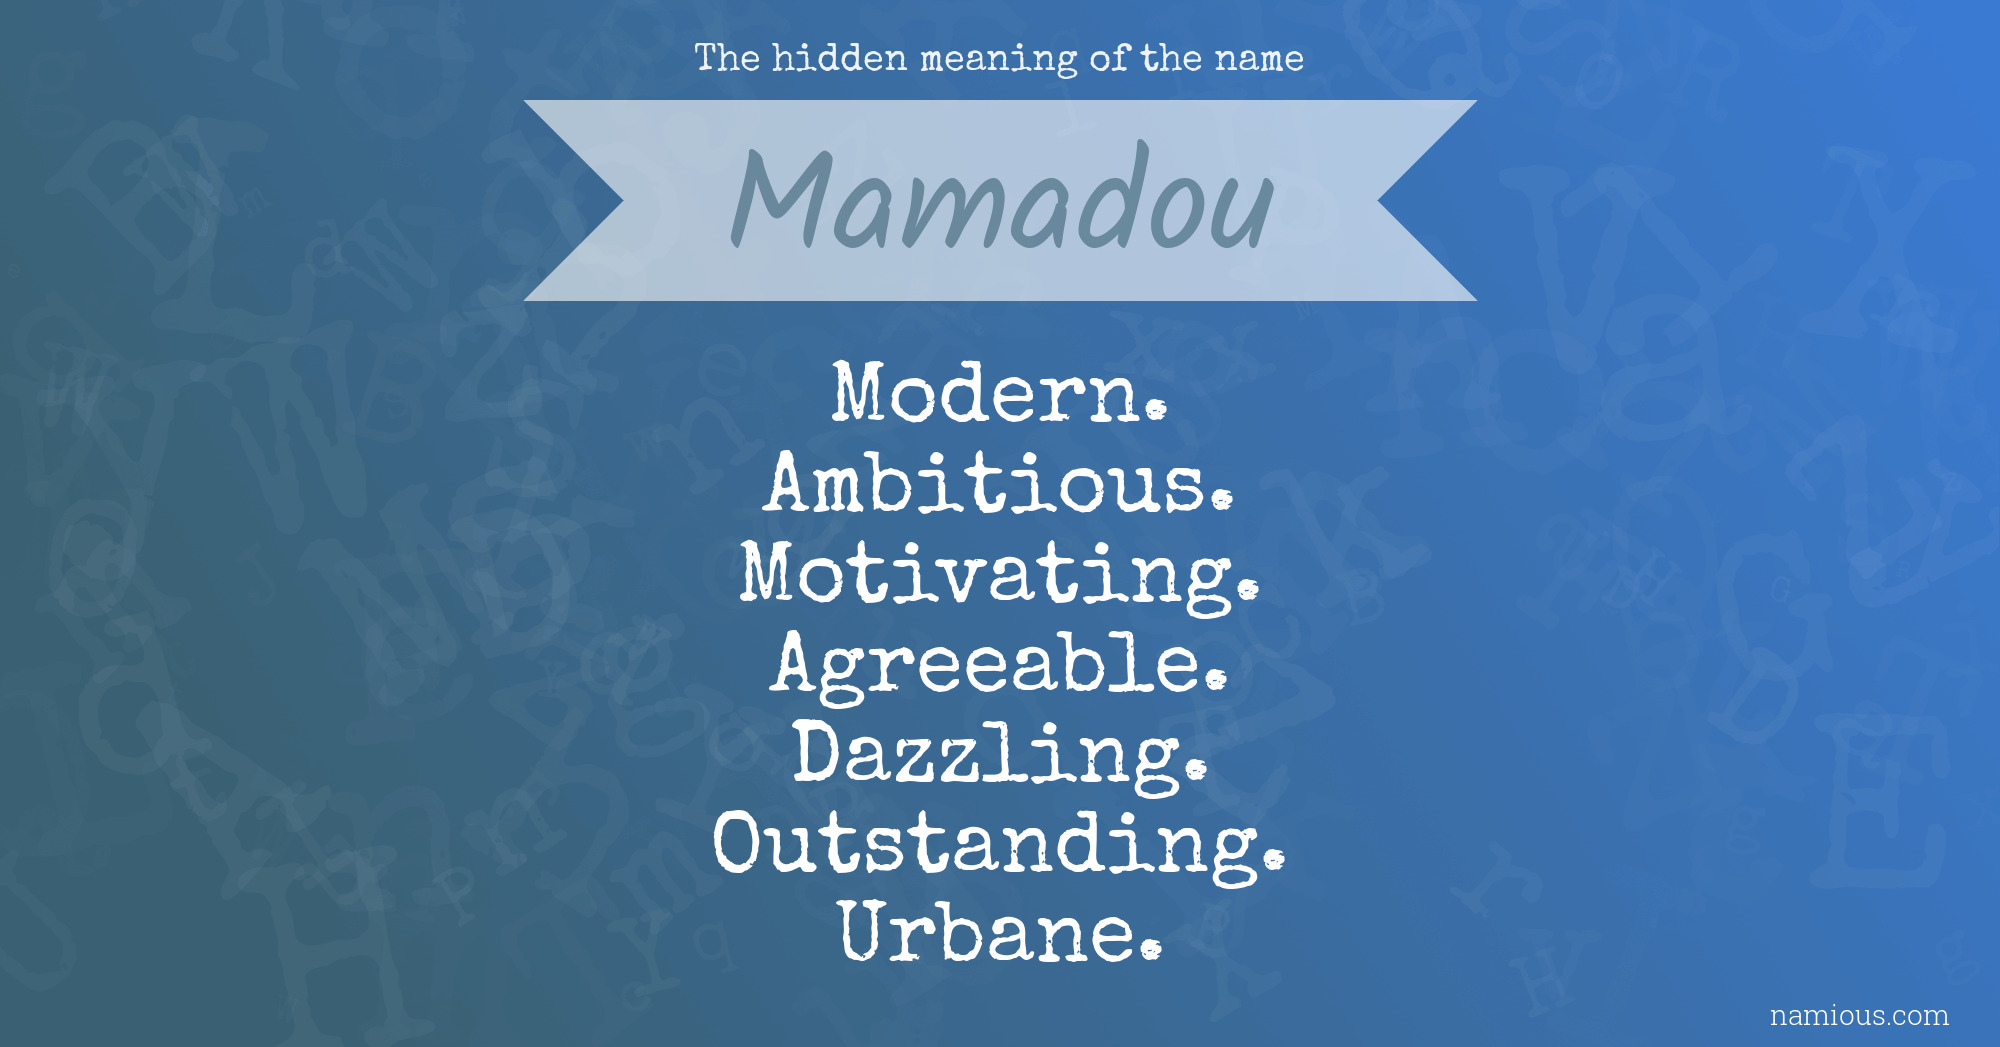 The hidden meaning of the name Mamadou